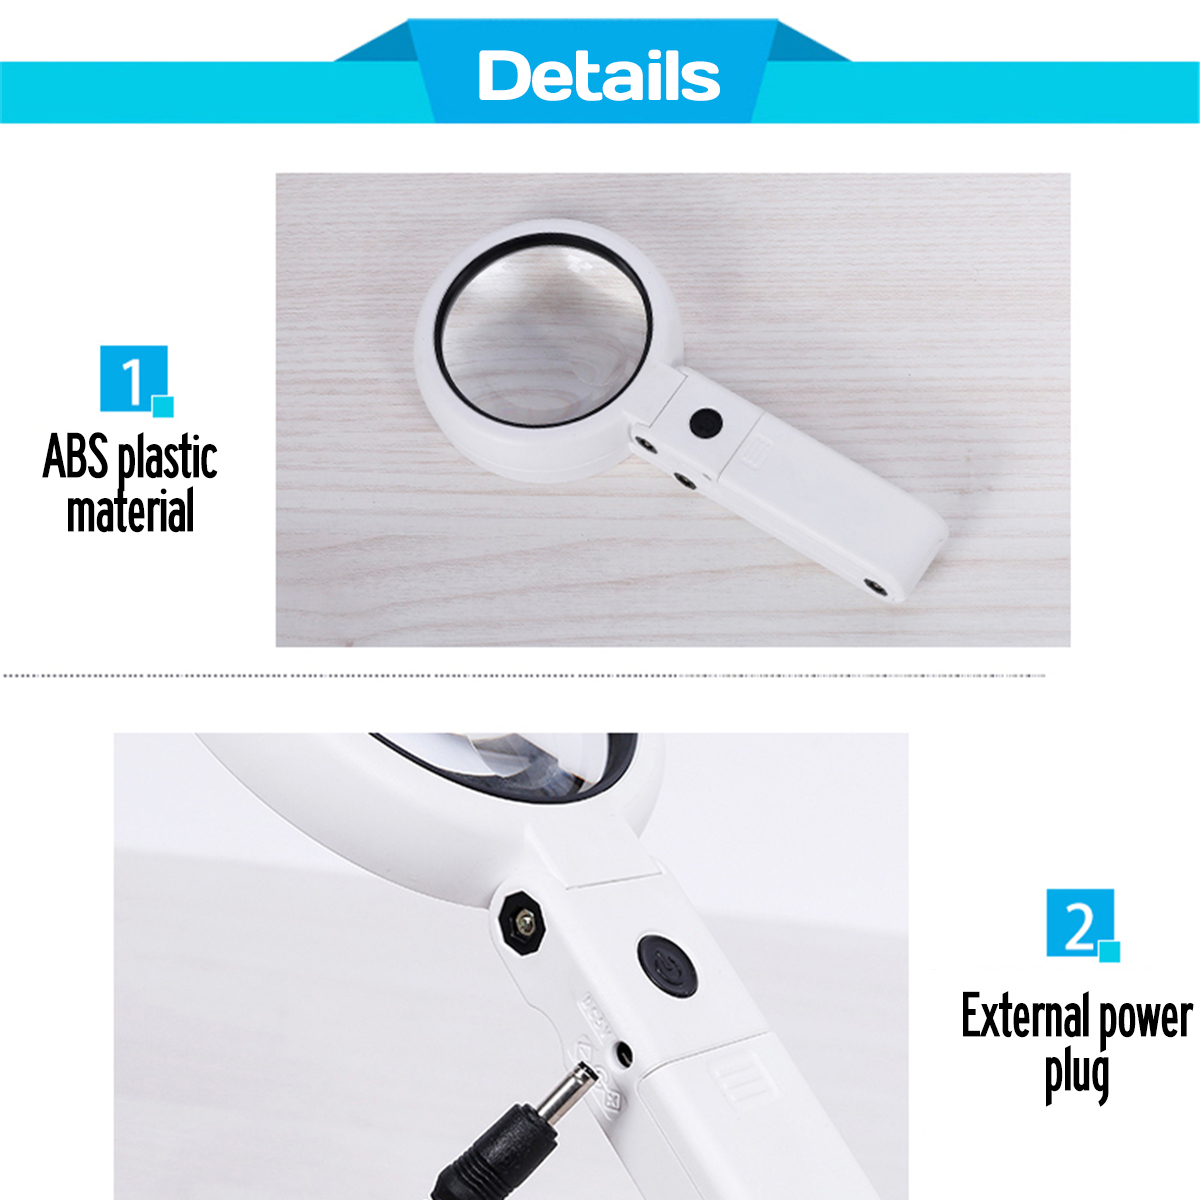 Handheld-Portable-Foldable-Lamp-Illuminated-Magnifier-5X-11X-Magnifying-Table-8-LED-Lights-Loupe-Mag-1472829-5